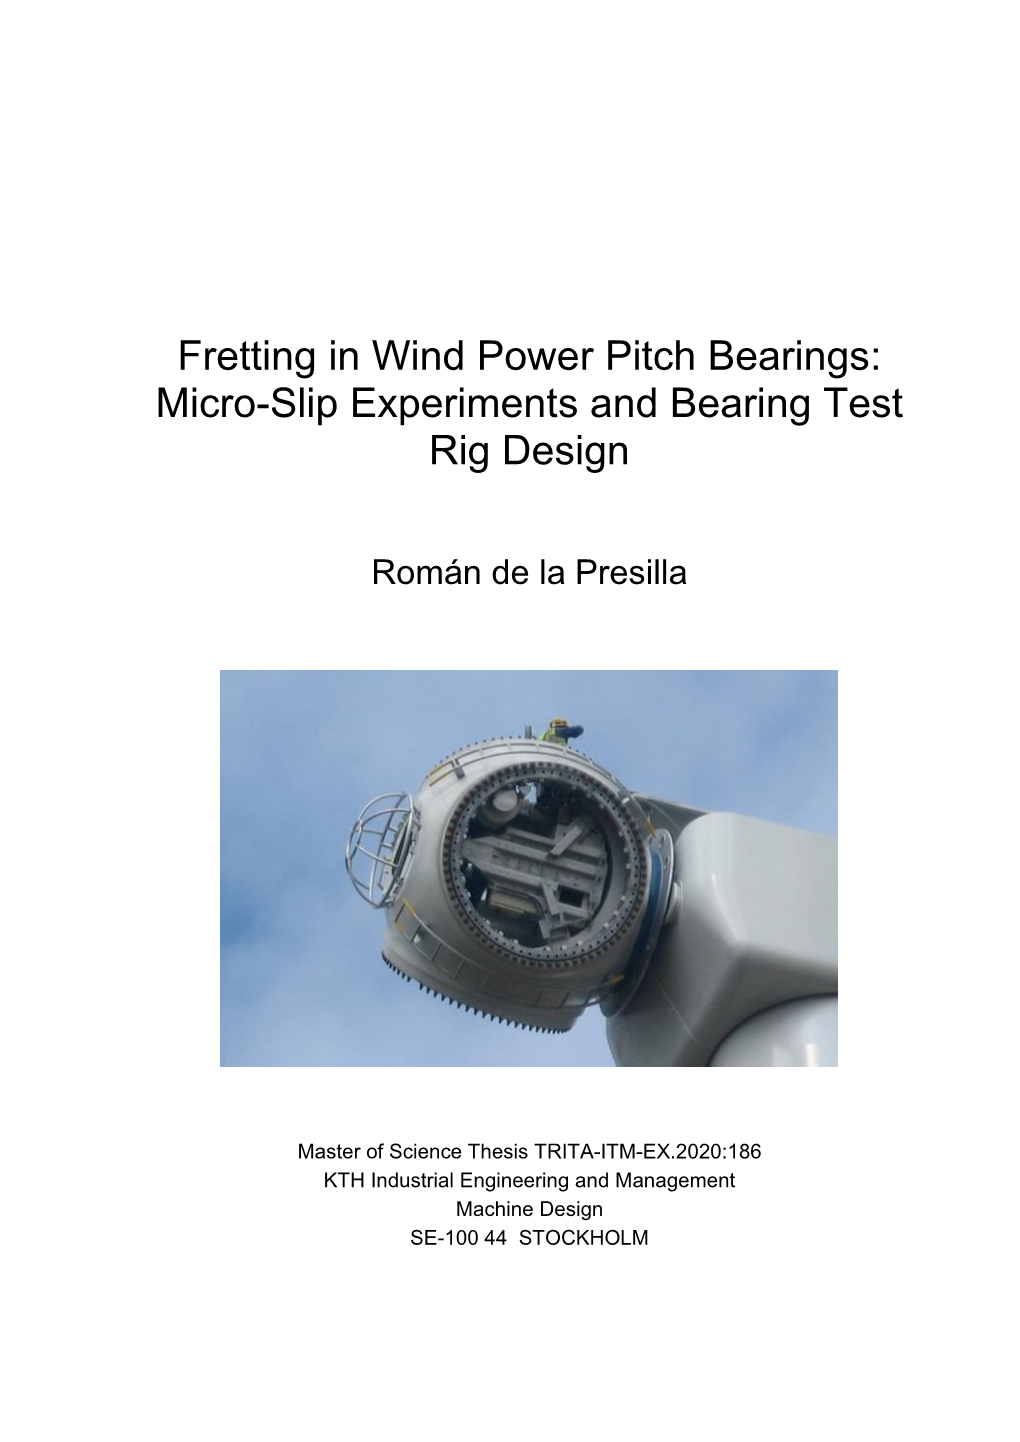 Fretting in Wind Power Pitch Bearings: Micro-Slip Experiments and Bearing Test Rig Design